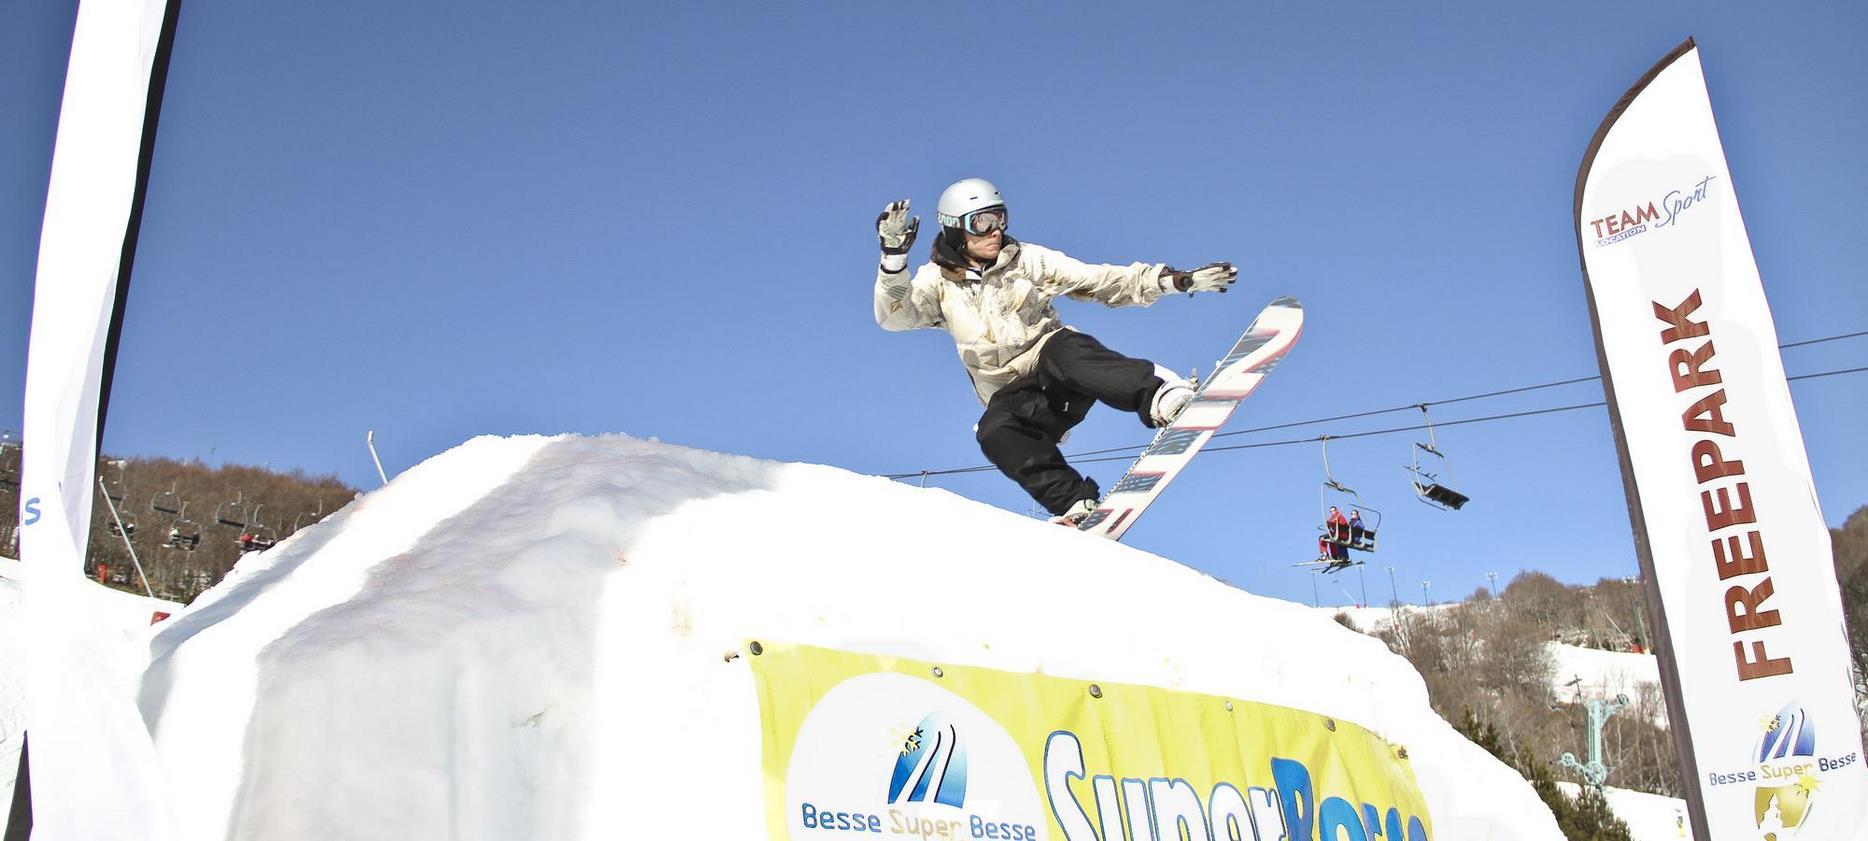 Super Besse - the realm of snowboarding sensations